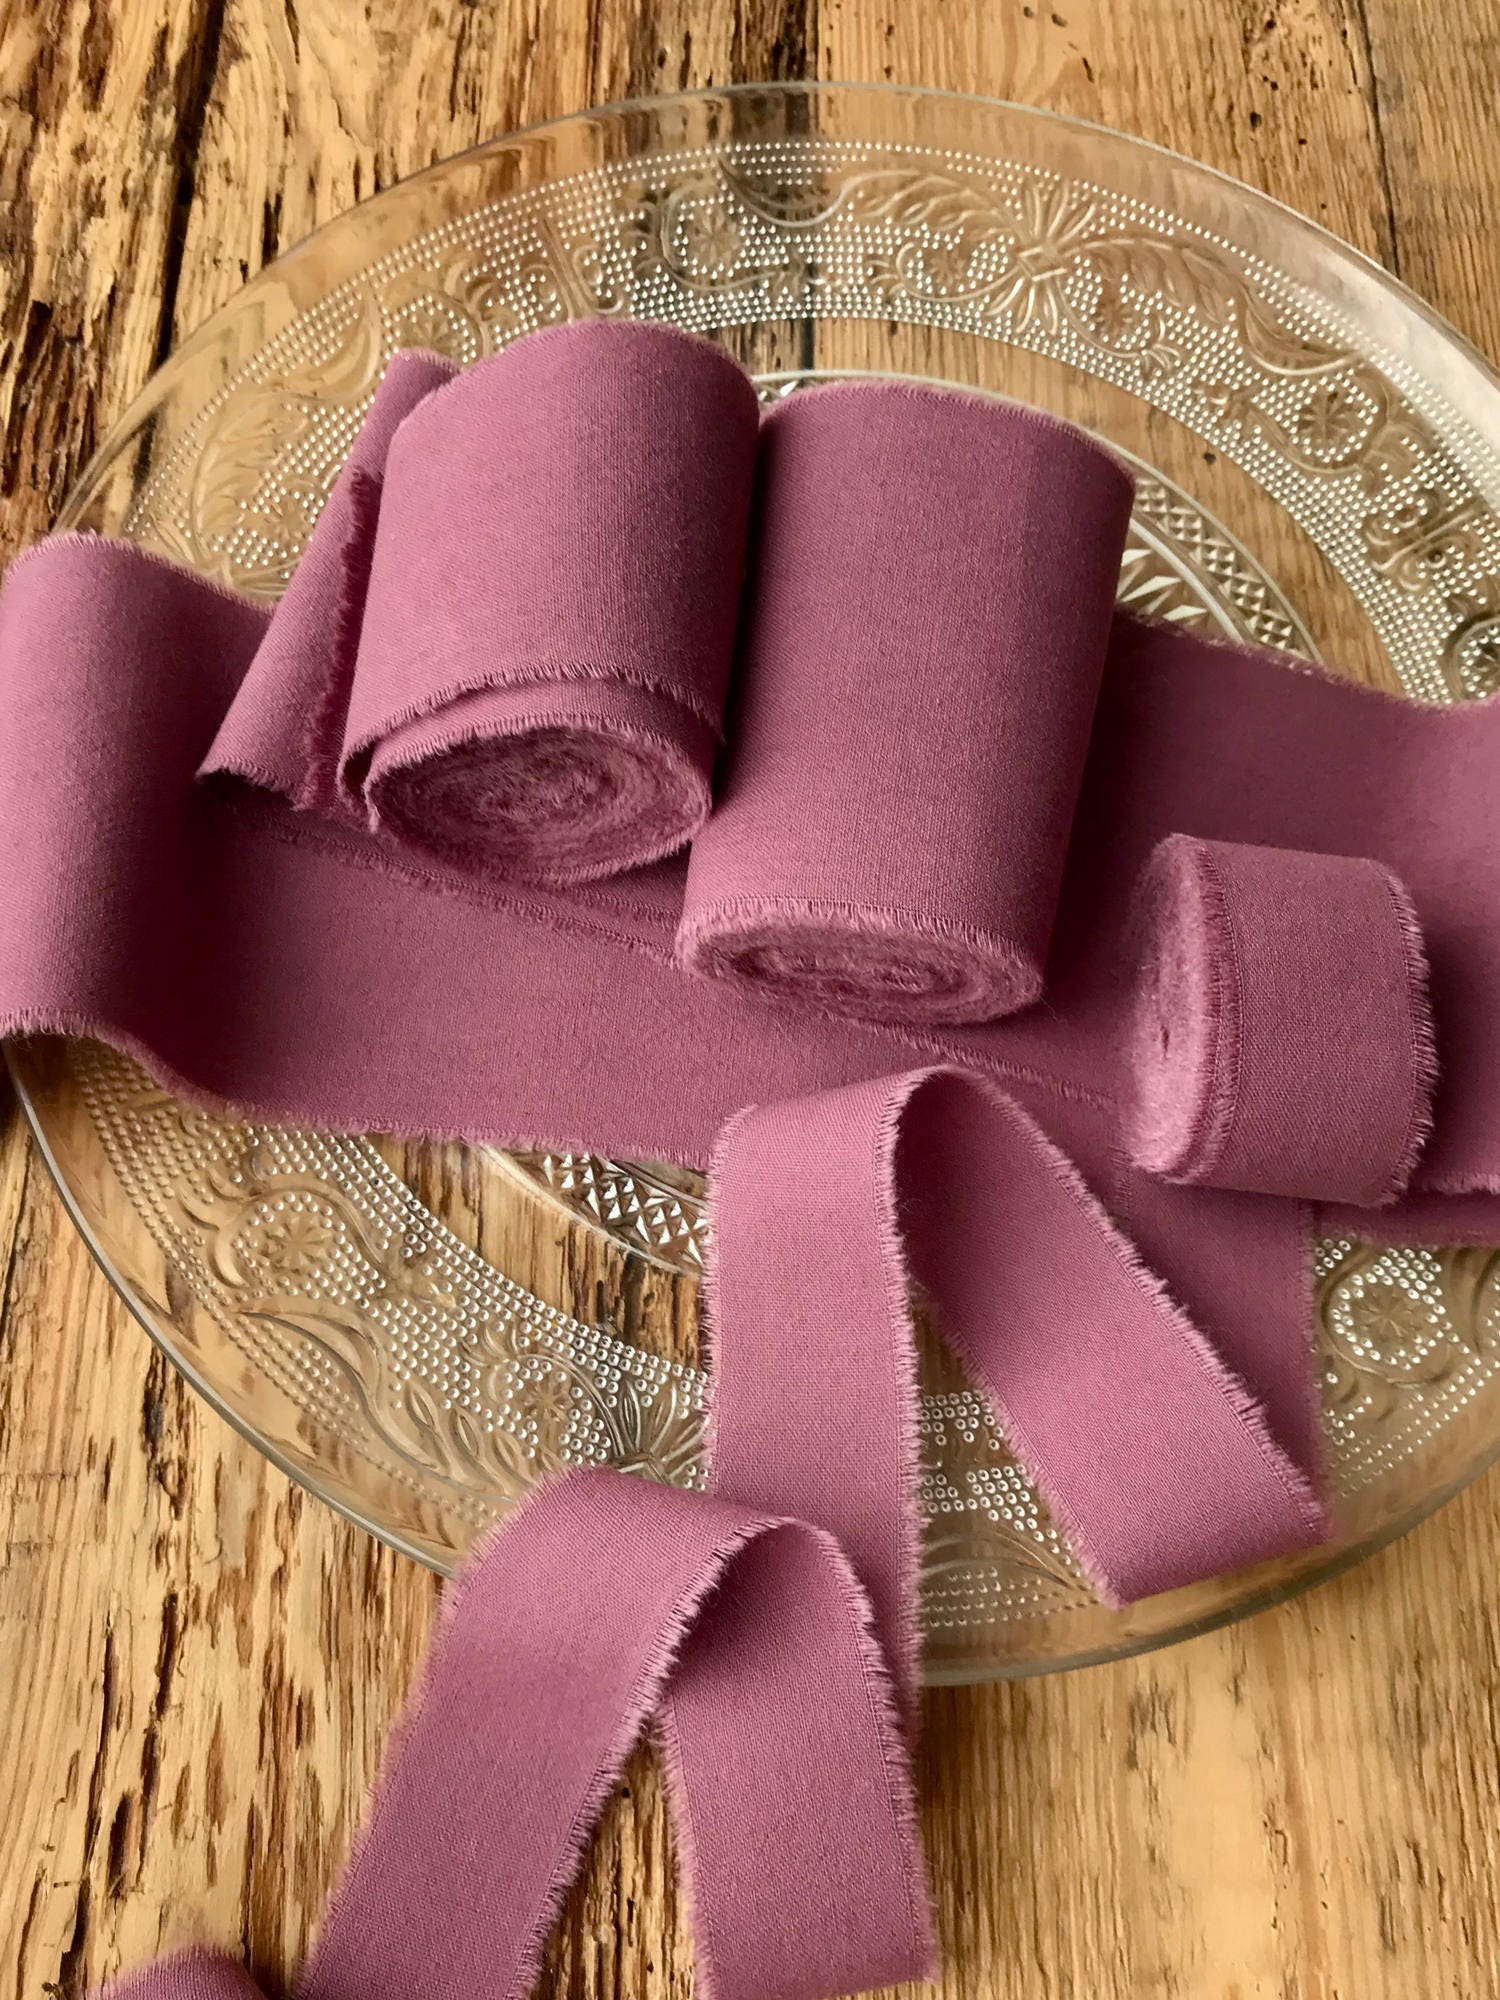 Whaline Dusty Rose Wedding Satin Ribbon 60yards Rose Pink Double-Sided Silk  Ribbons 1 Inch 6 Colors for Gifts Wrapping Wedding Bridal Baby Shower